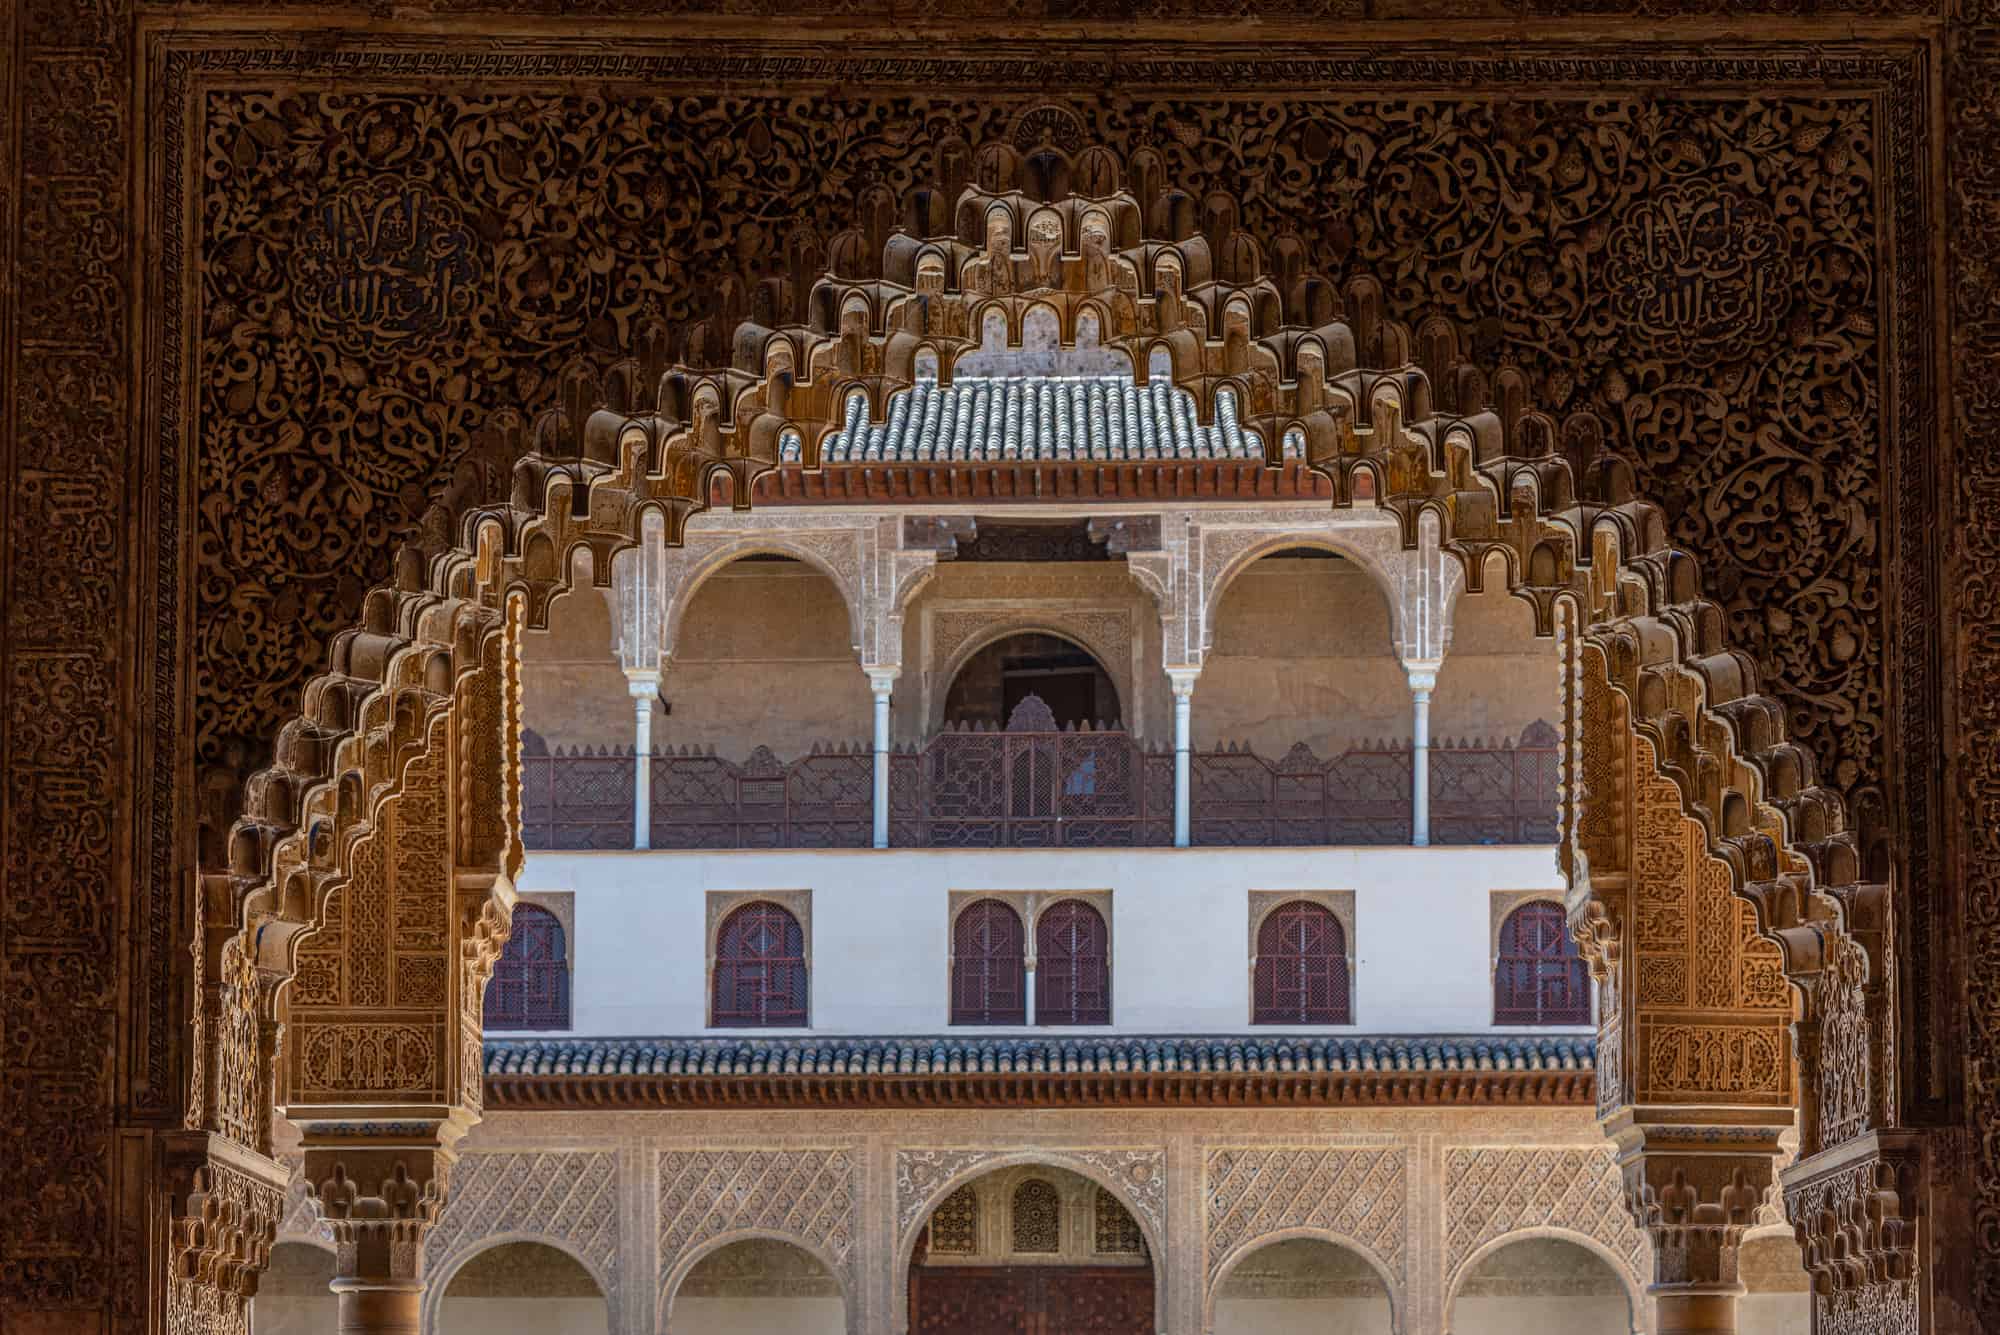 Ornaments inside of Alhambra palace in Granada, Spain